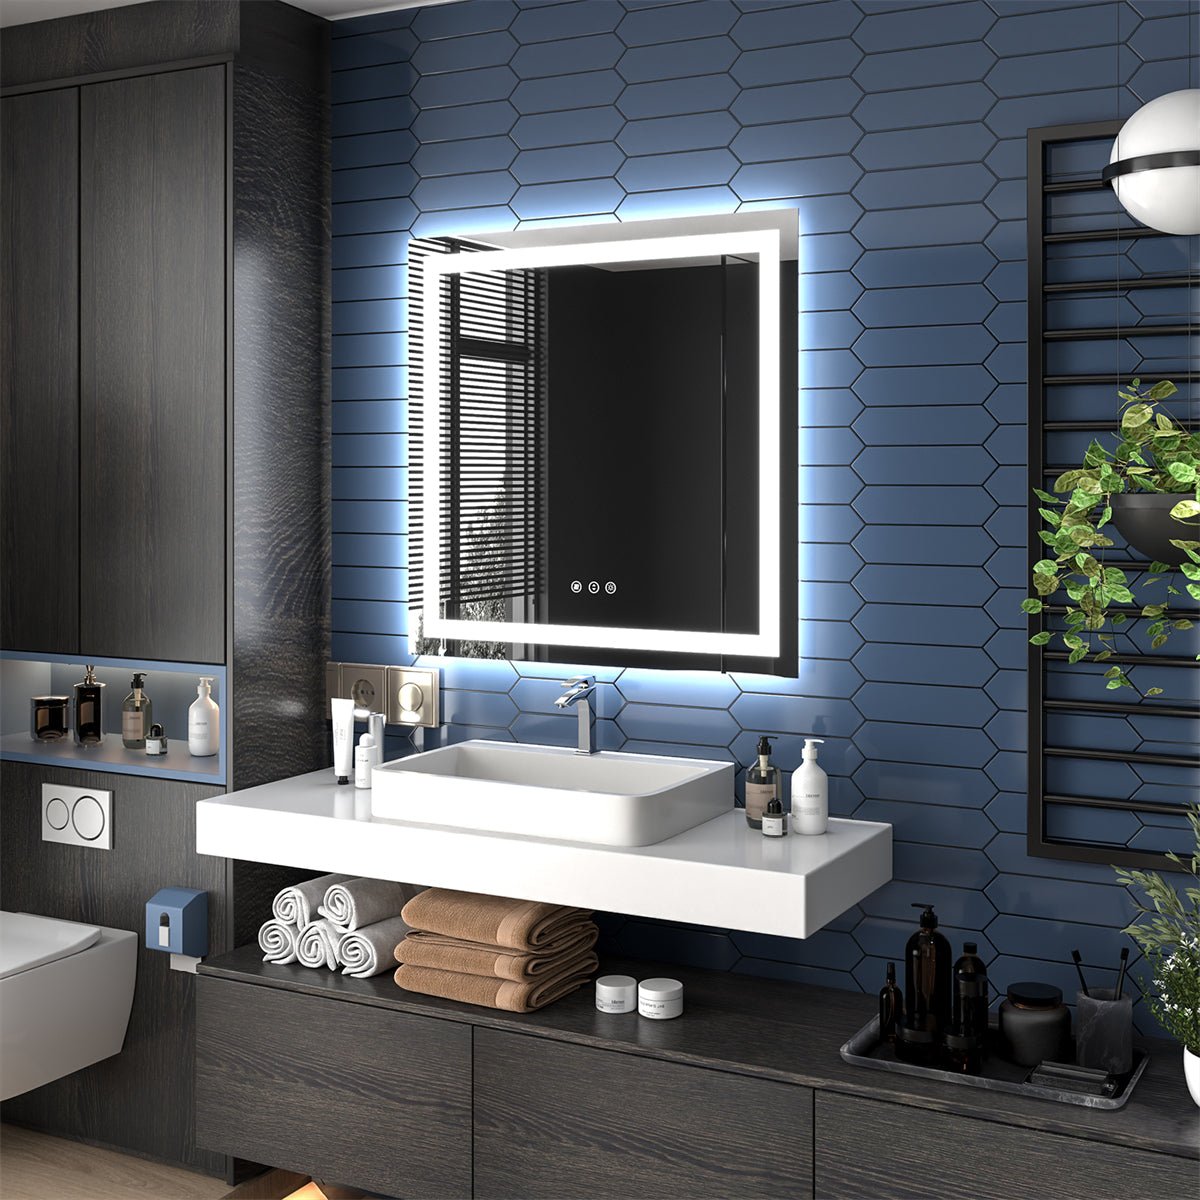 Apex 36" W X 36" H LED Bathroom Large Light Led Mirror,Anti Fog,Dimmable,Dual Lighting Mode,Tempered Glass